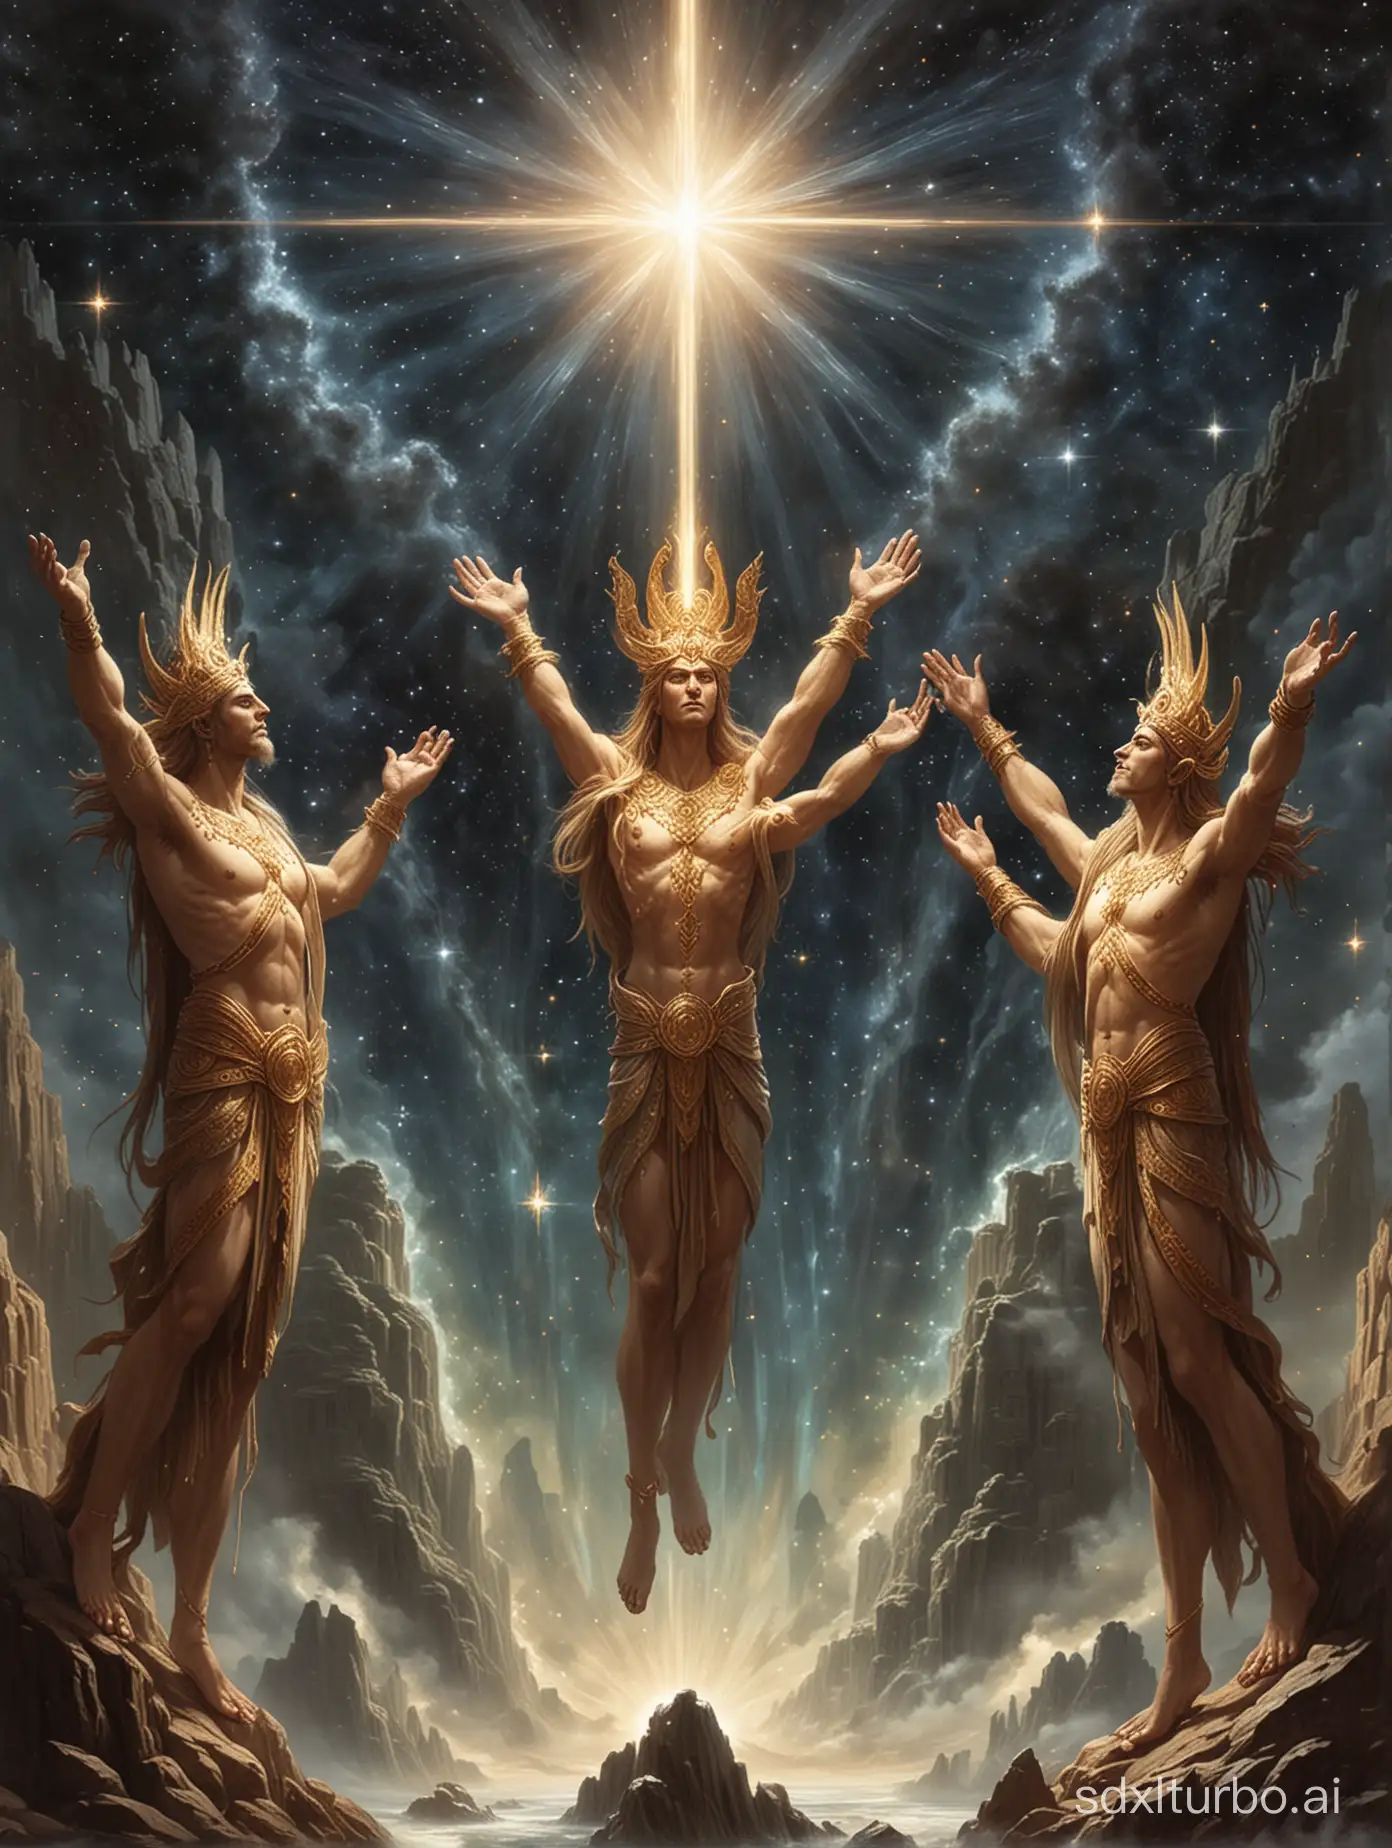 The three primordial star gods reach out their hands to grasp the dimensions.